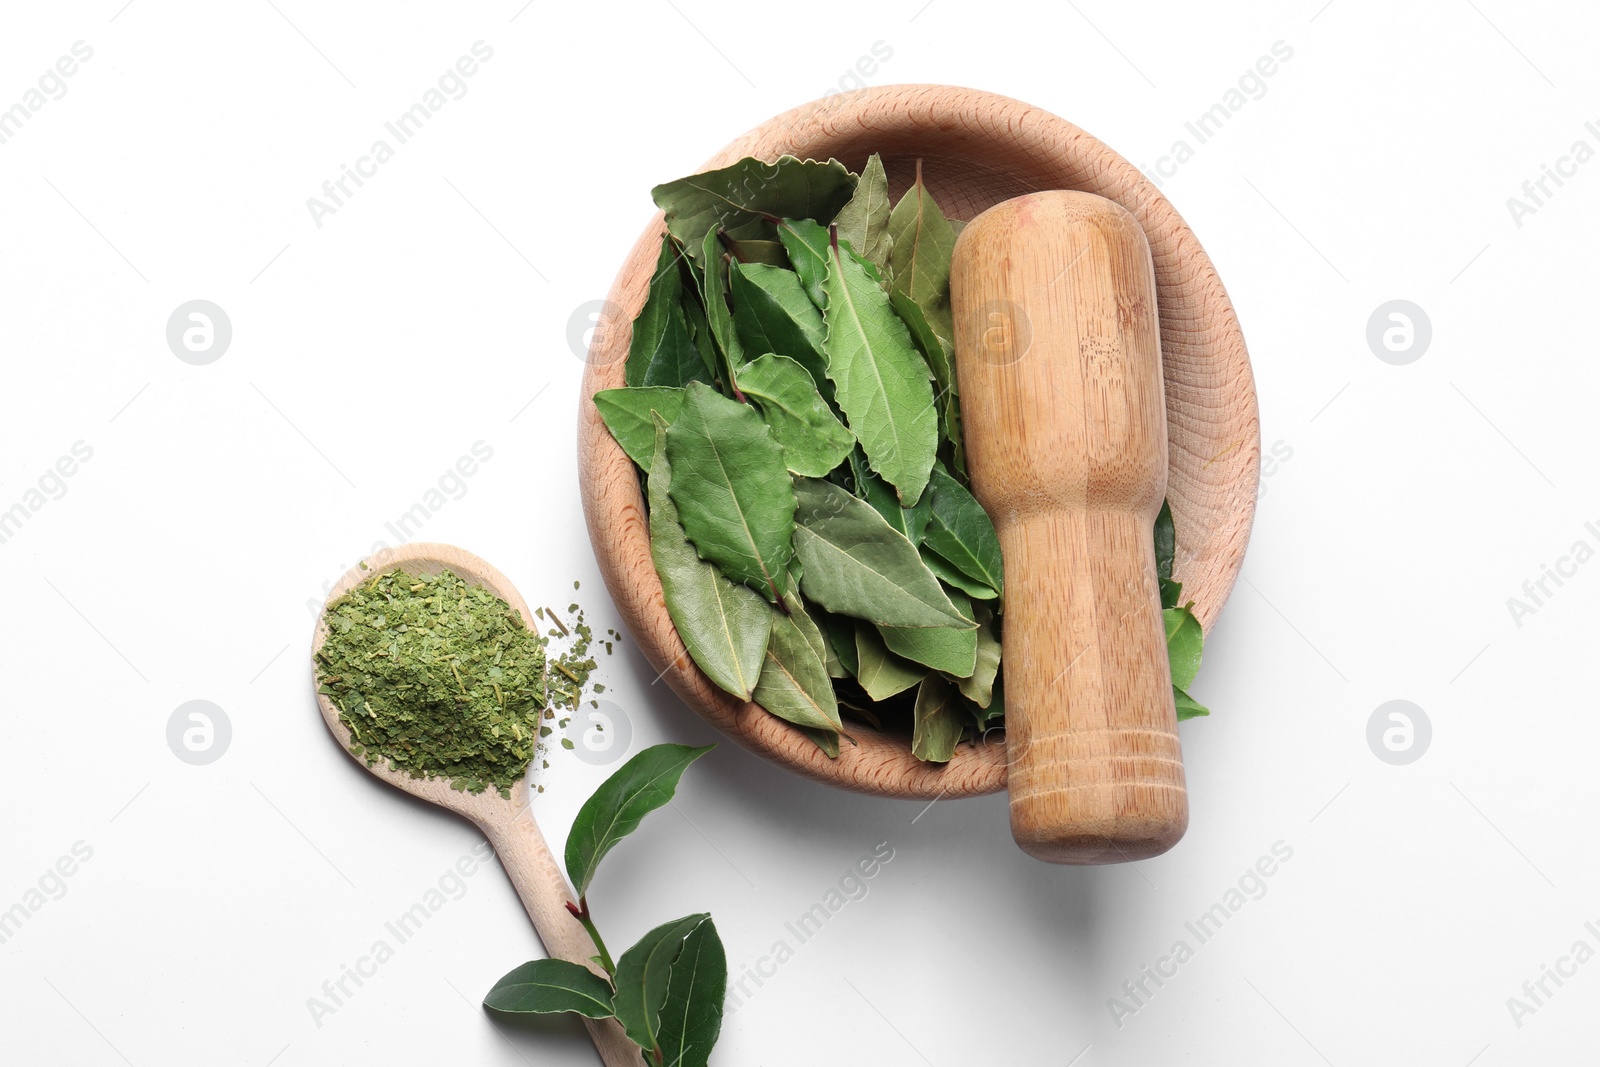 Photo of Wooden mortar and pestle with bay leaves on white background, top view